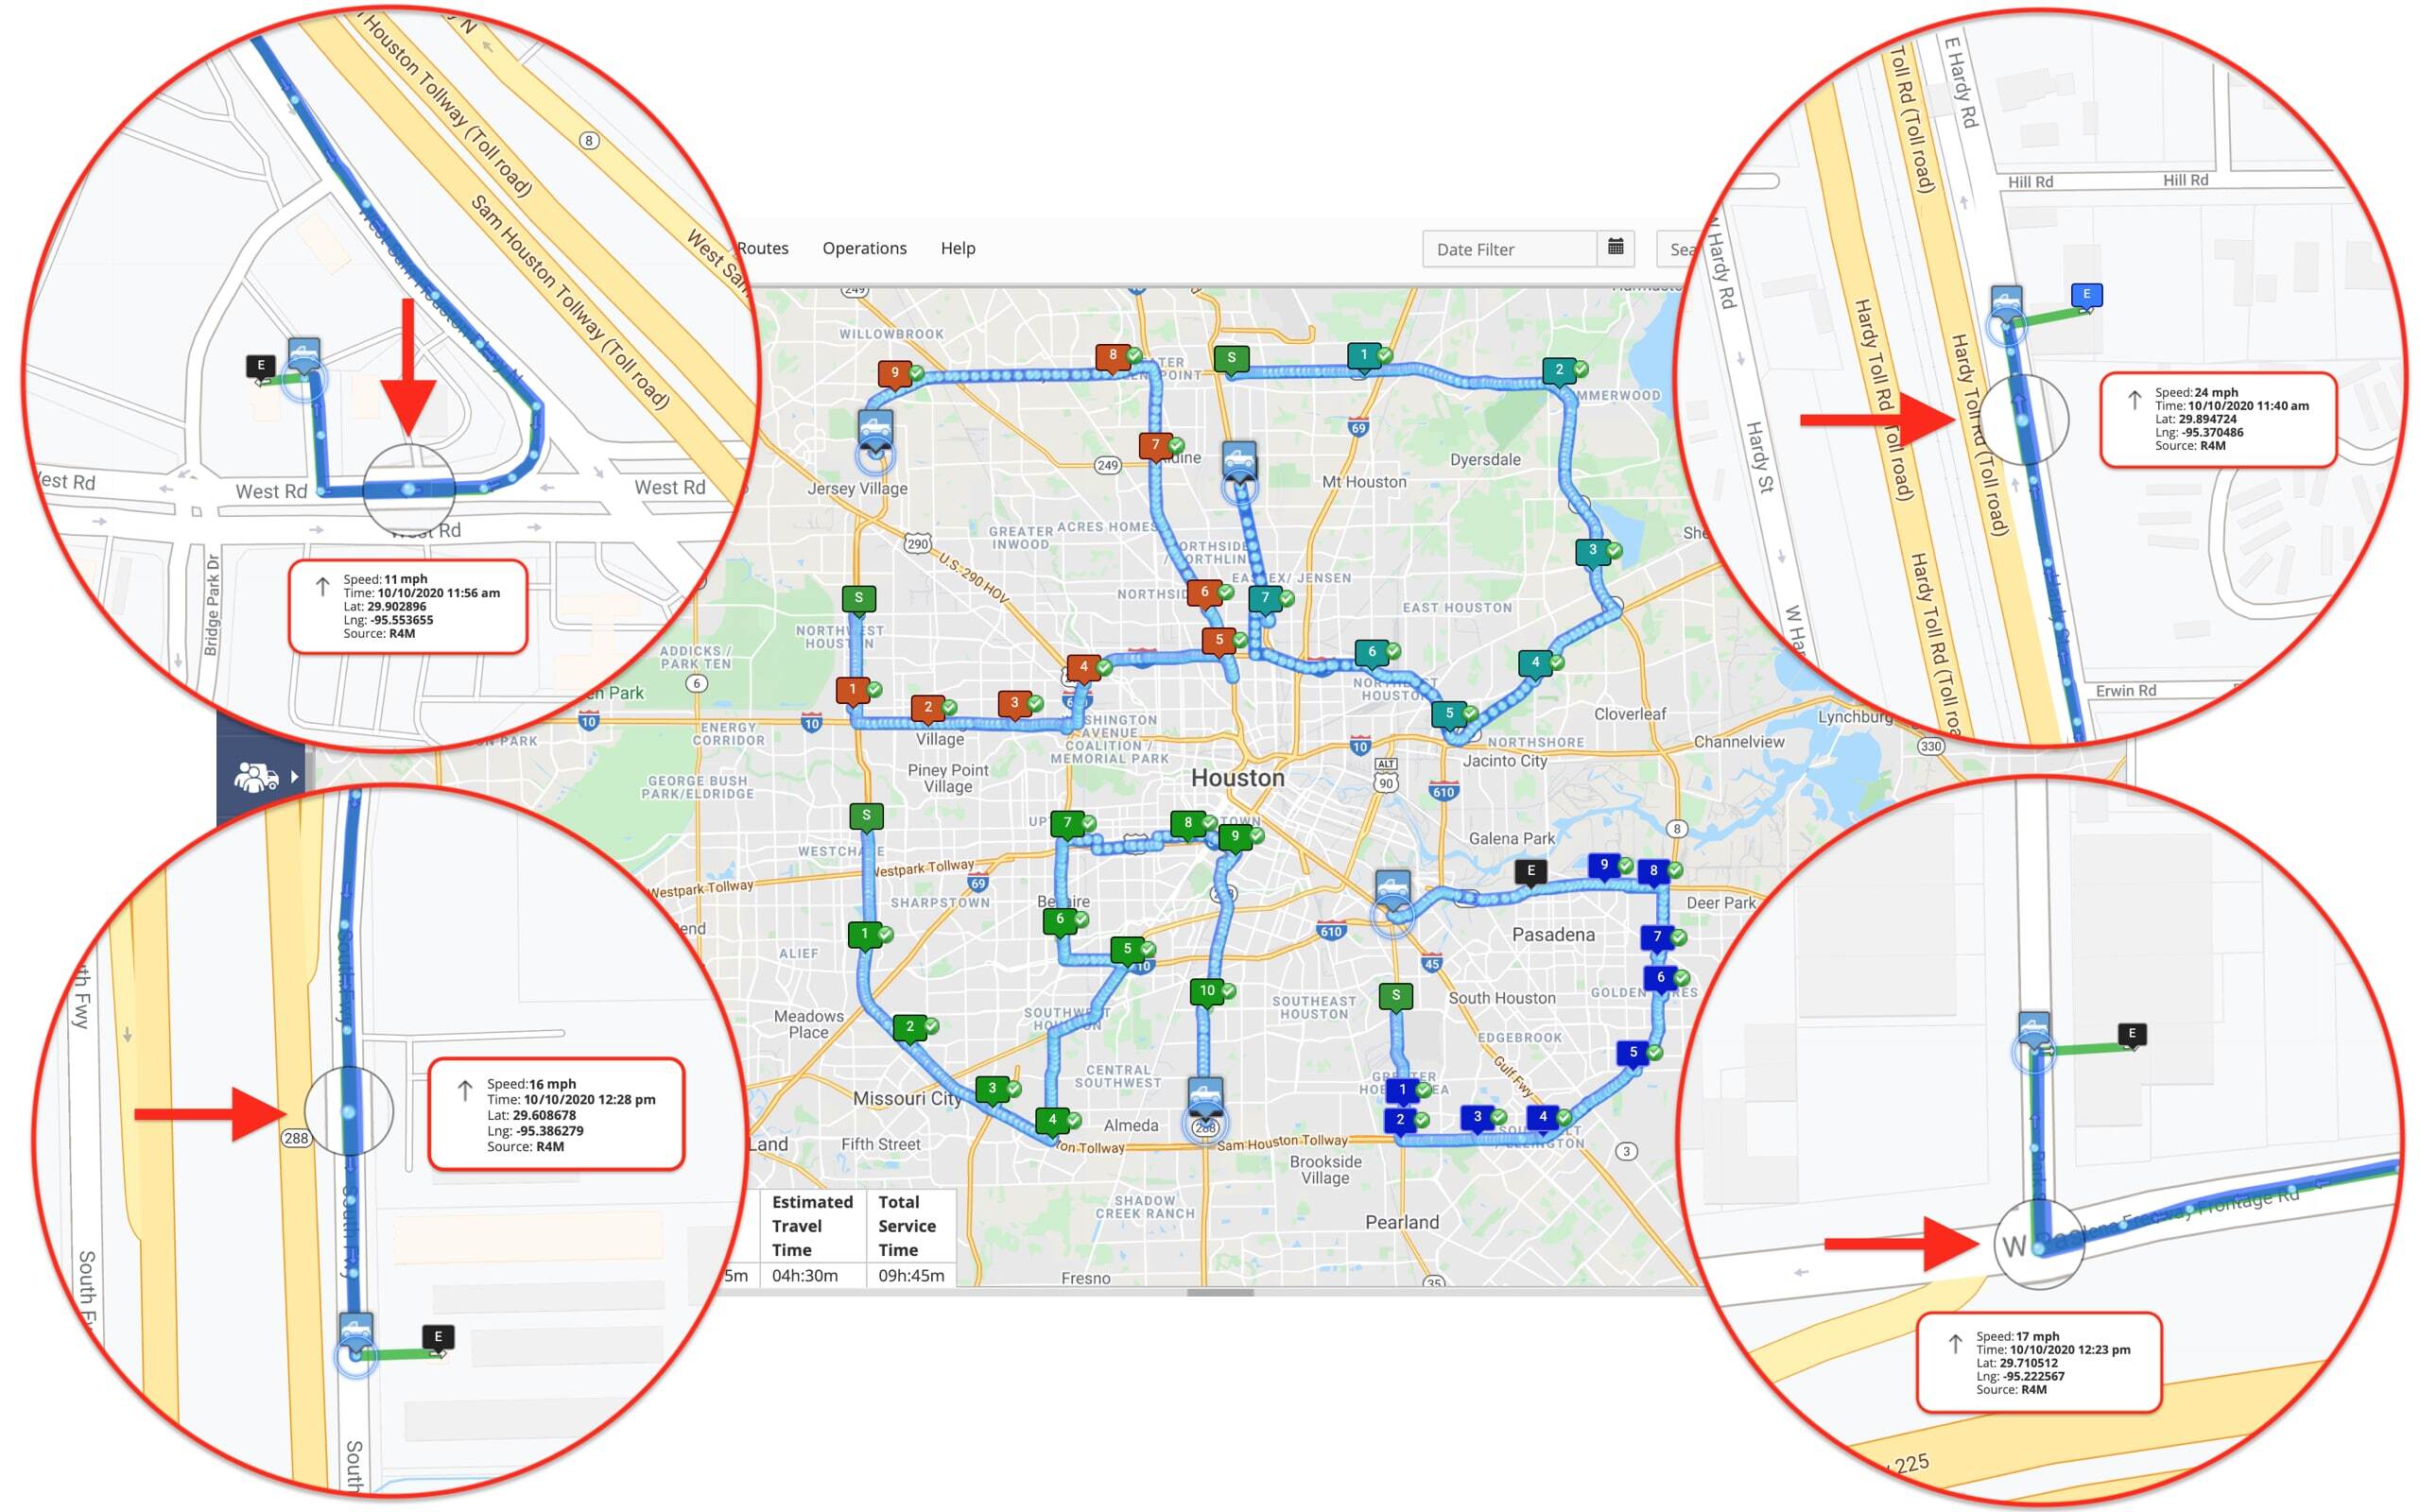 Delivery tracking for last-mile carriers with multiple drivers' real-time locations on the same map.